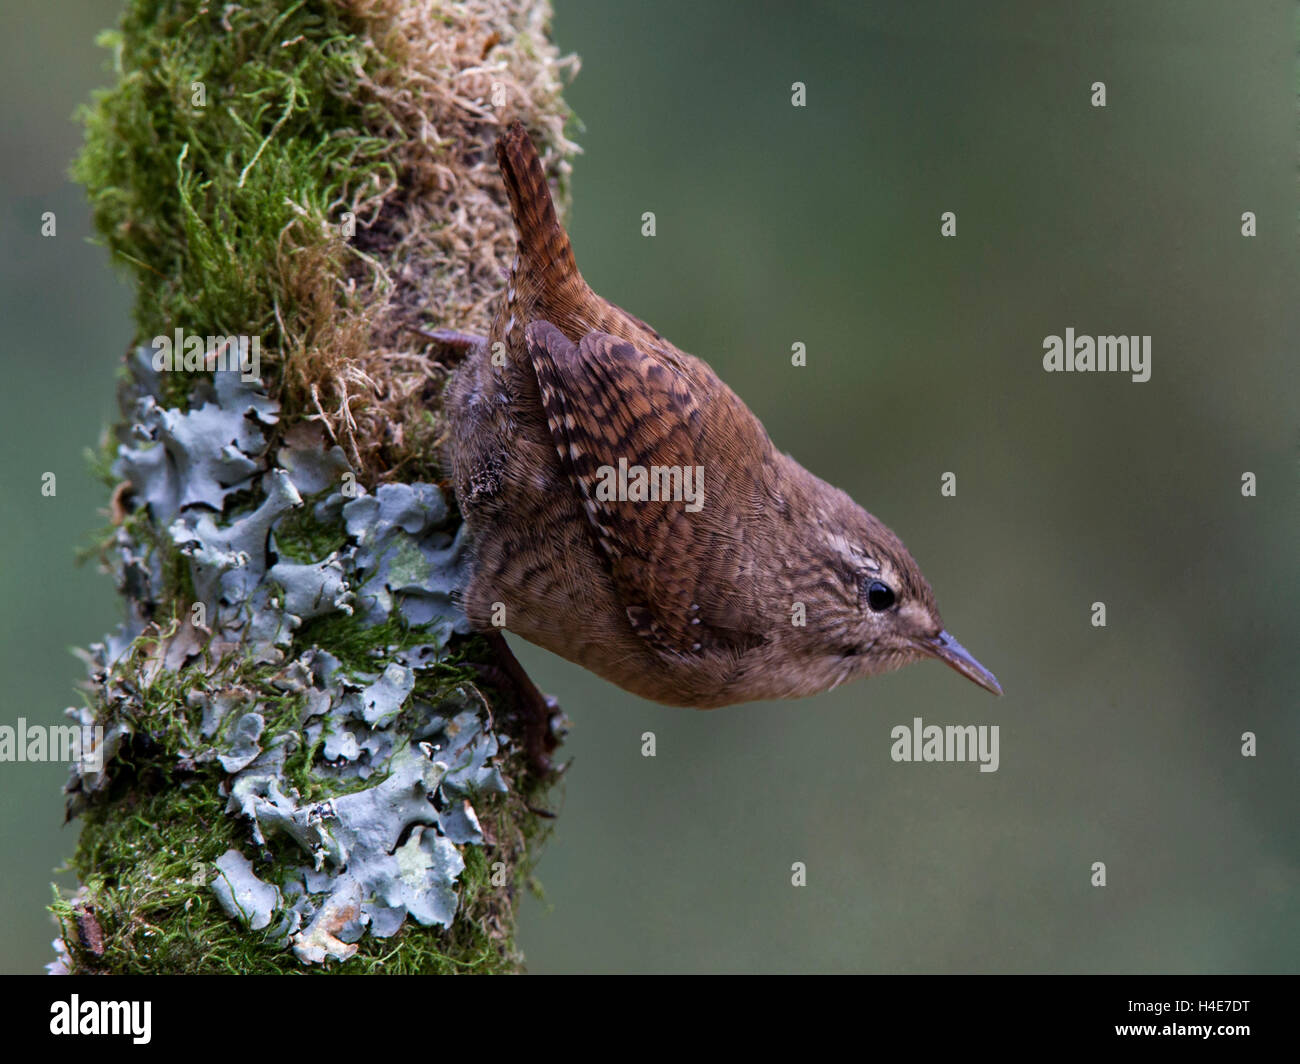 Wren perched on tree Stock Photo